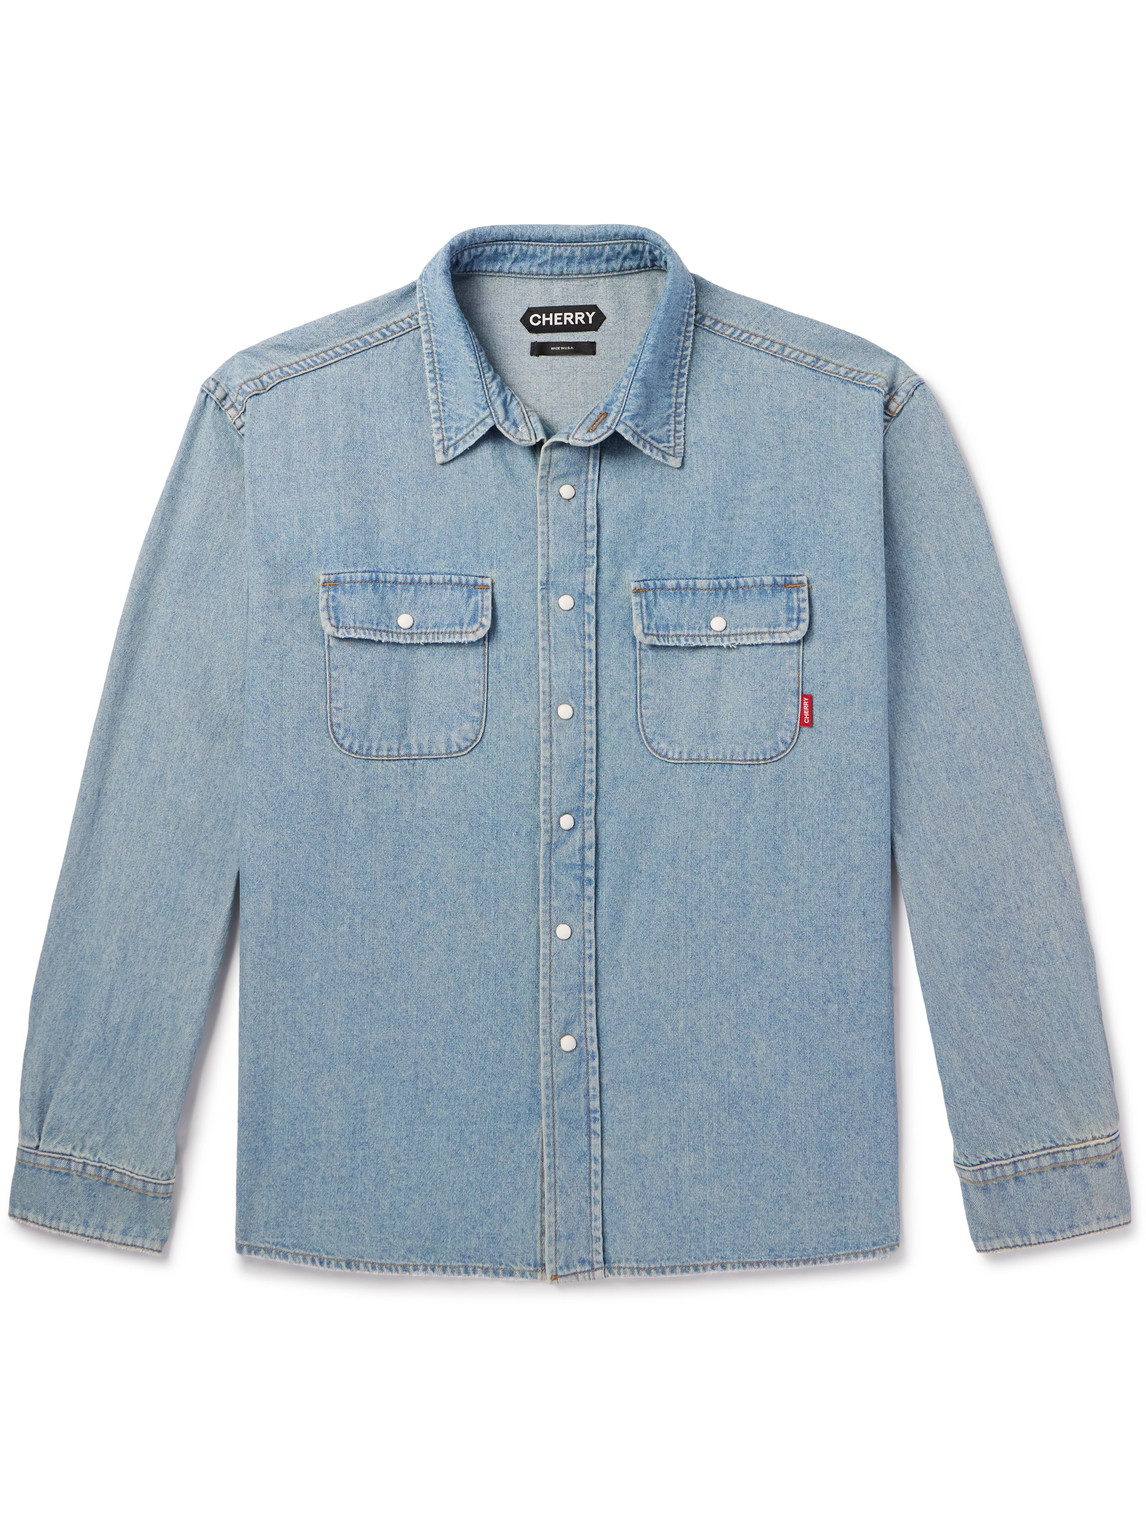 Cherry Los Angeles Embroidered Denim Overshirt In Blue